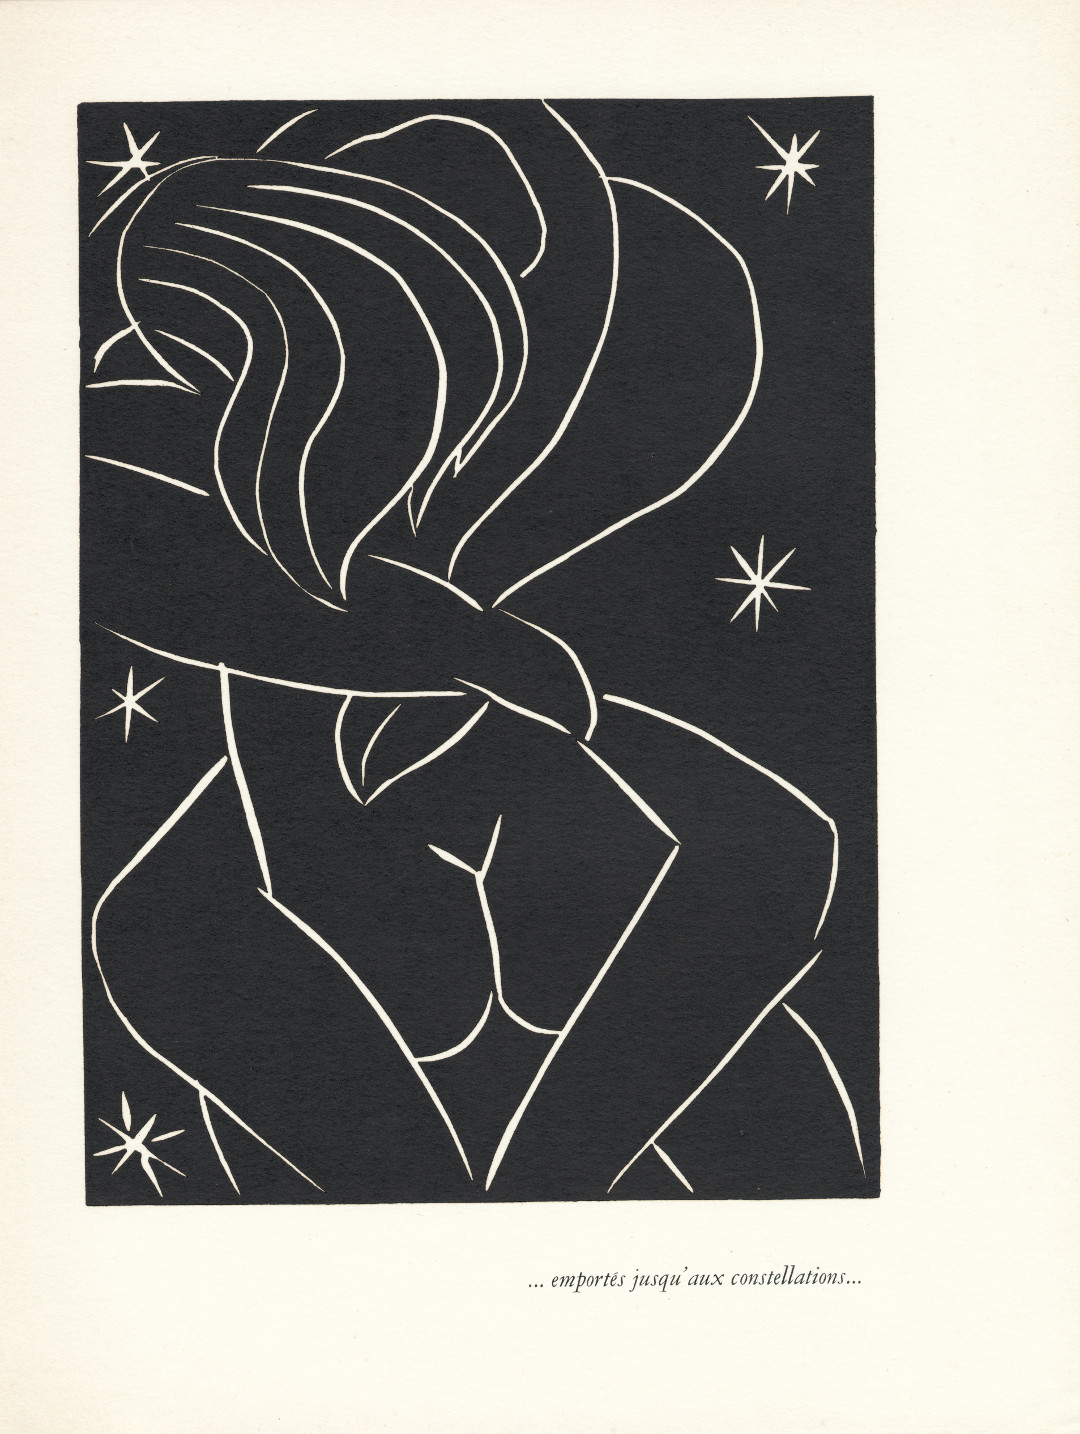 ‘… emportés jusqu’aux constellations…’, (1944) by Henri Matisse. As reproduced in The Art of the Erotic